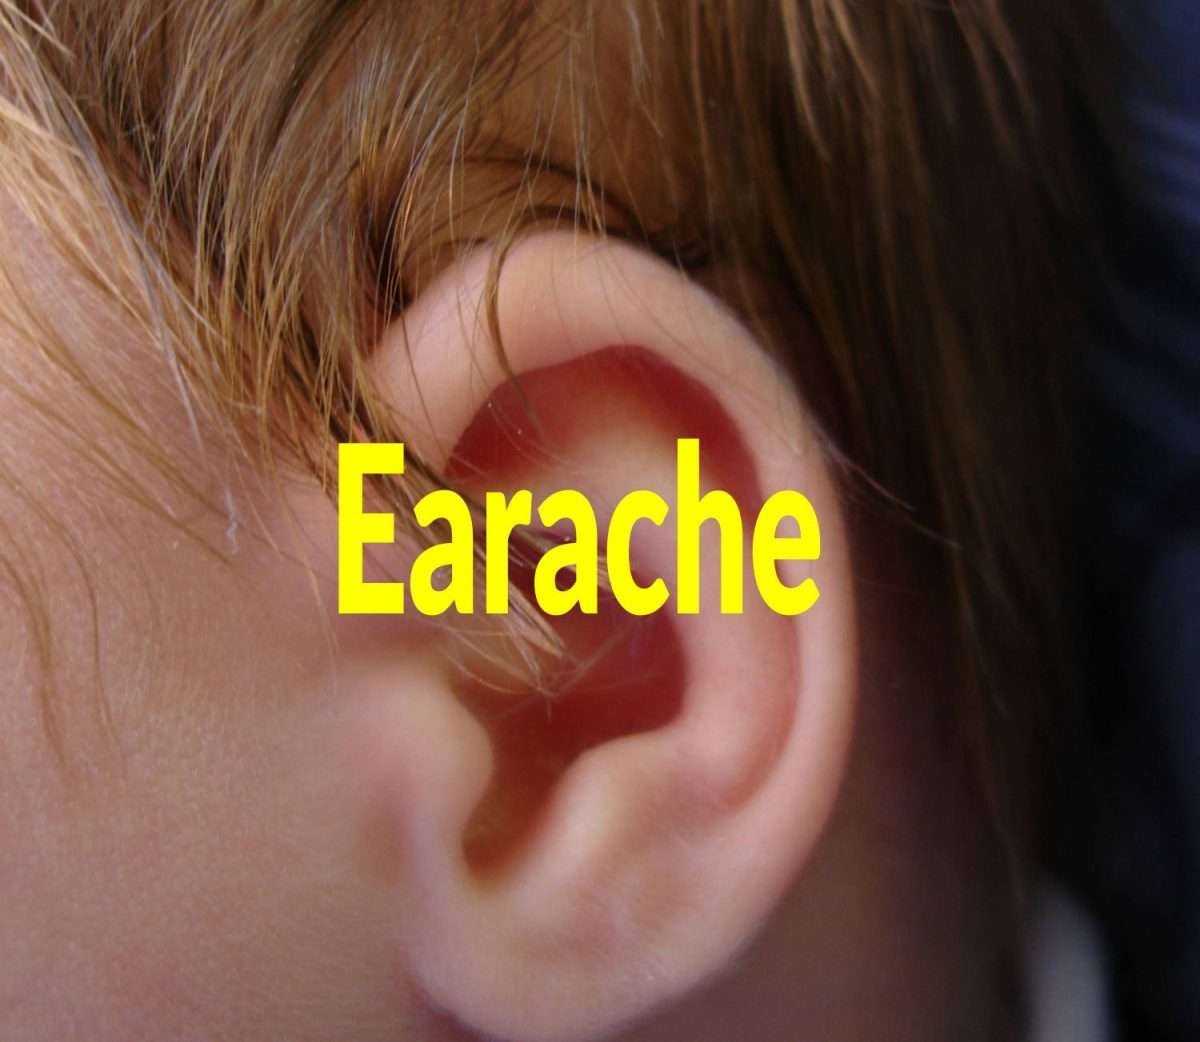 10 Home Remedies for Earache